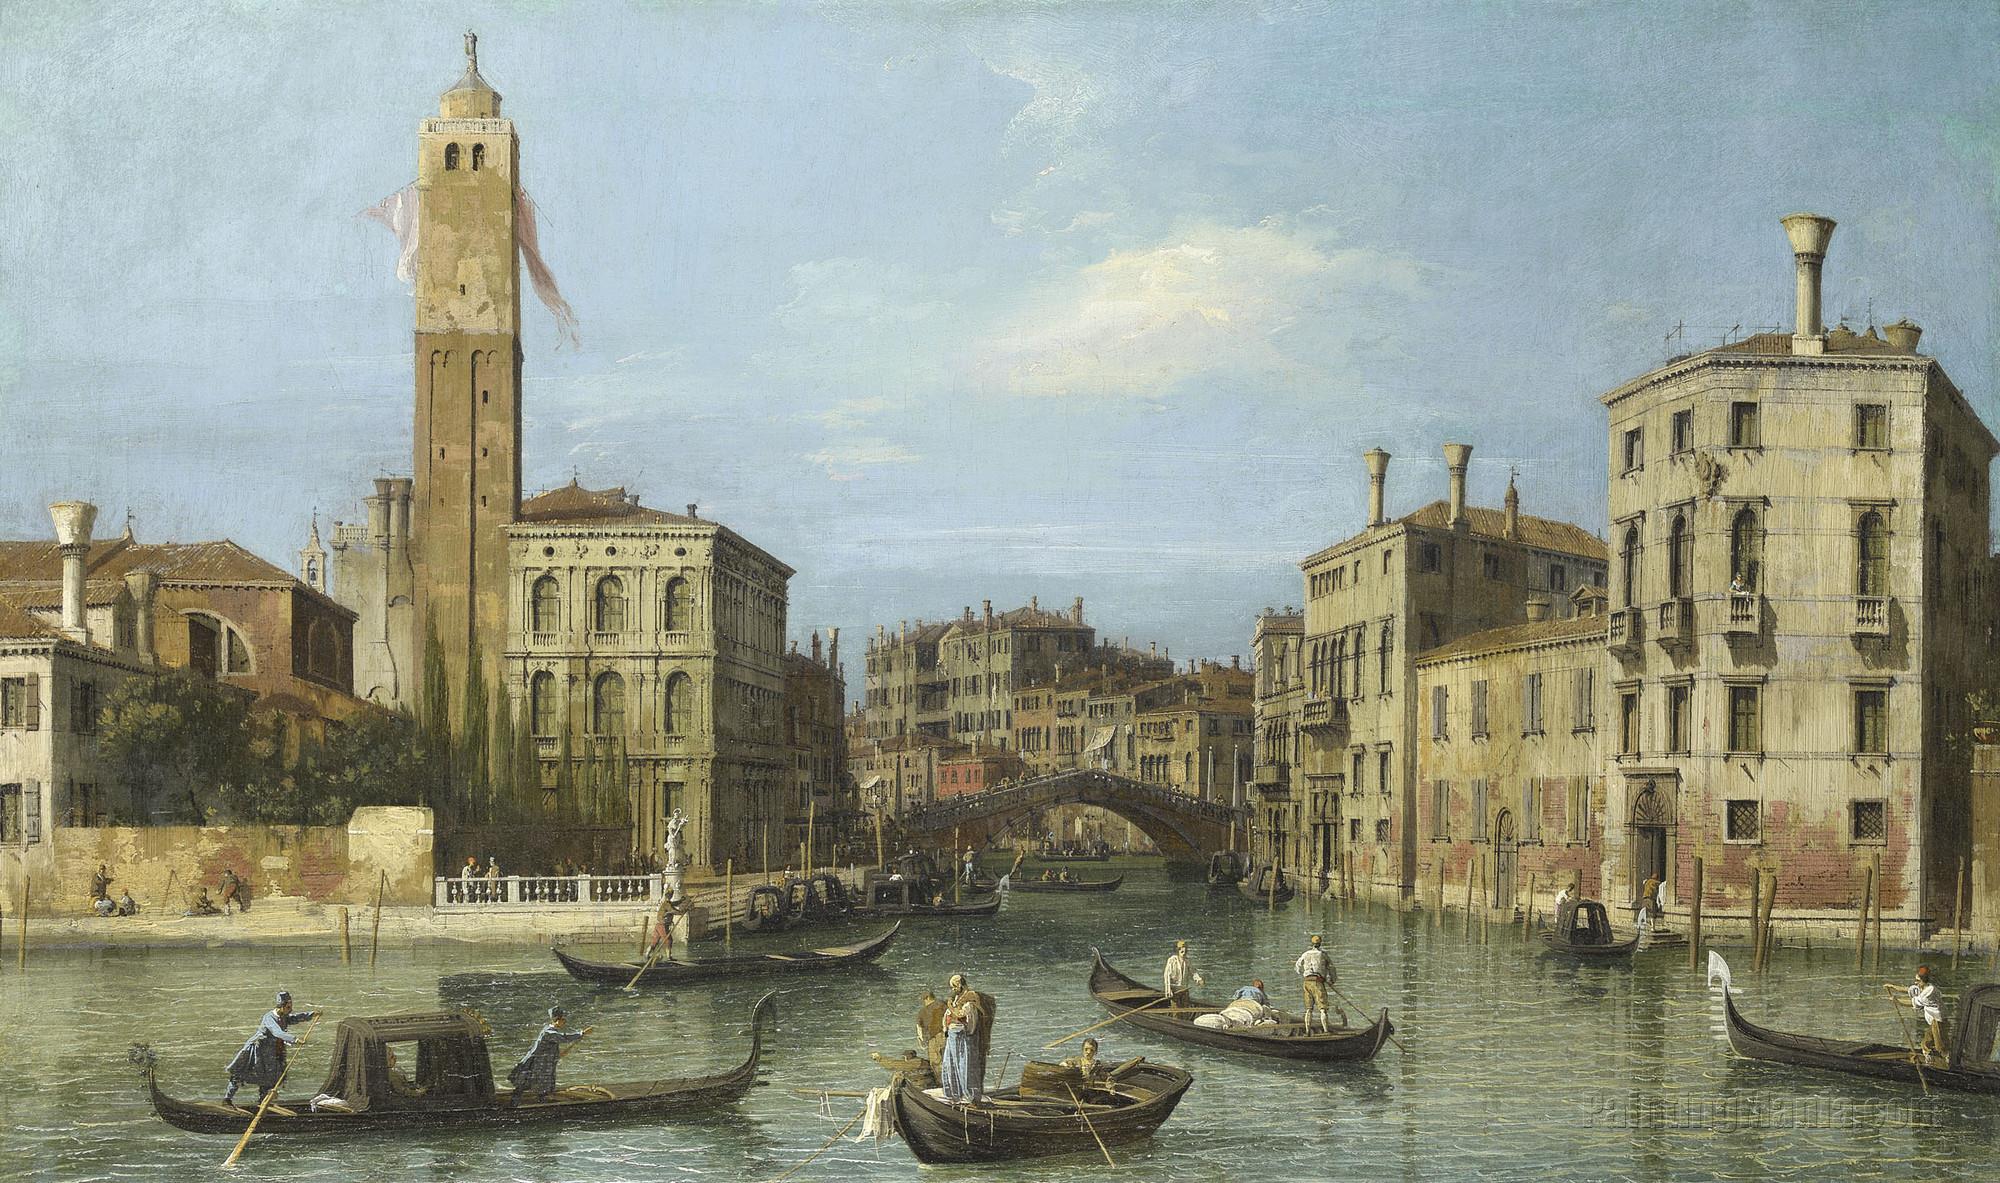 Venice: S. Geremia and the Entrance to the Cannaregio